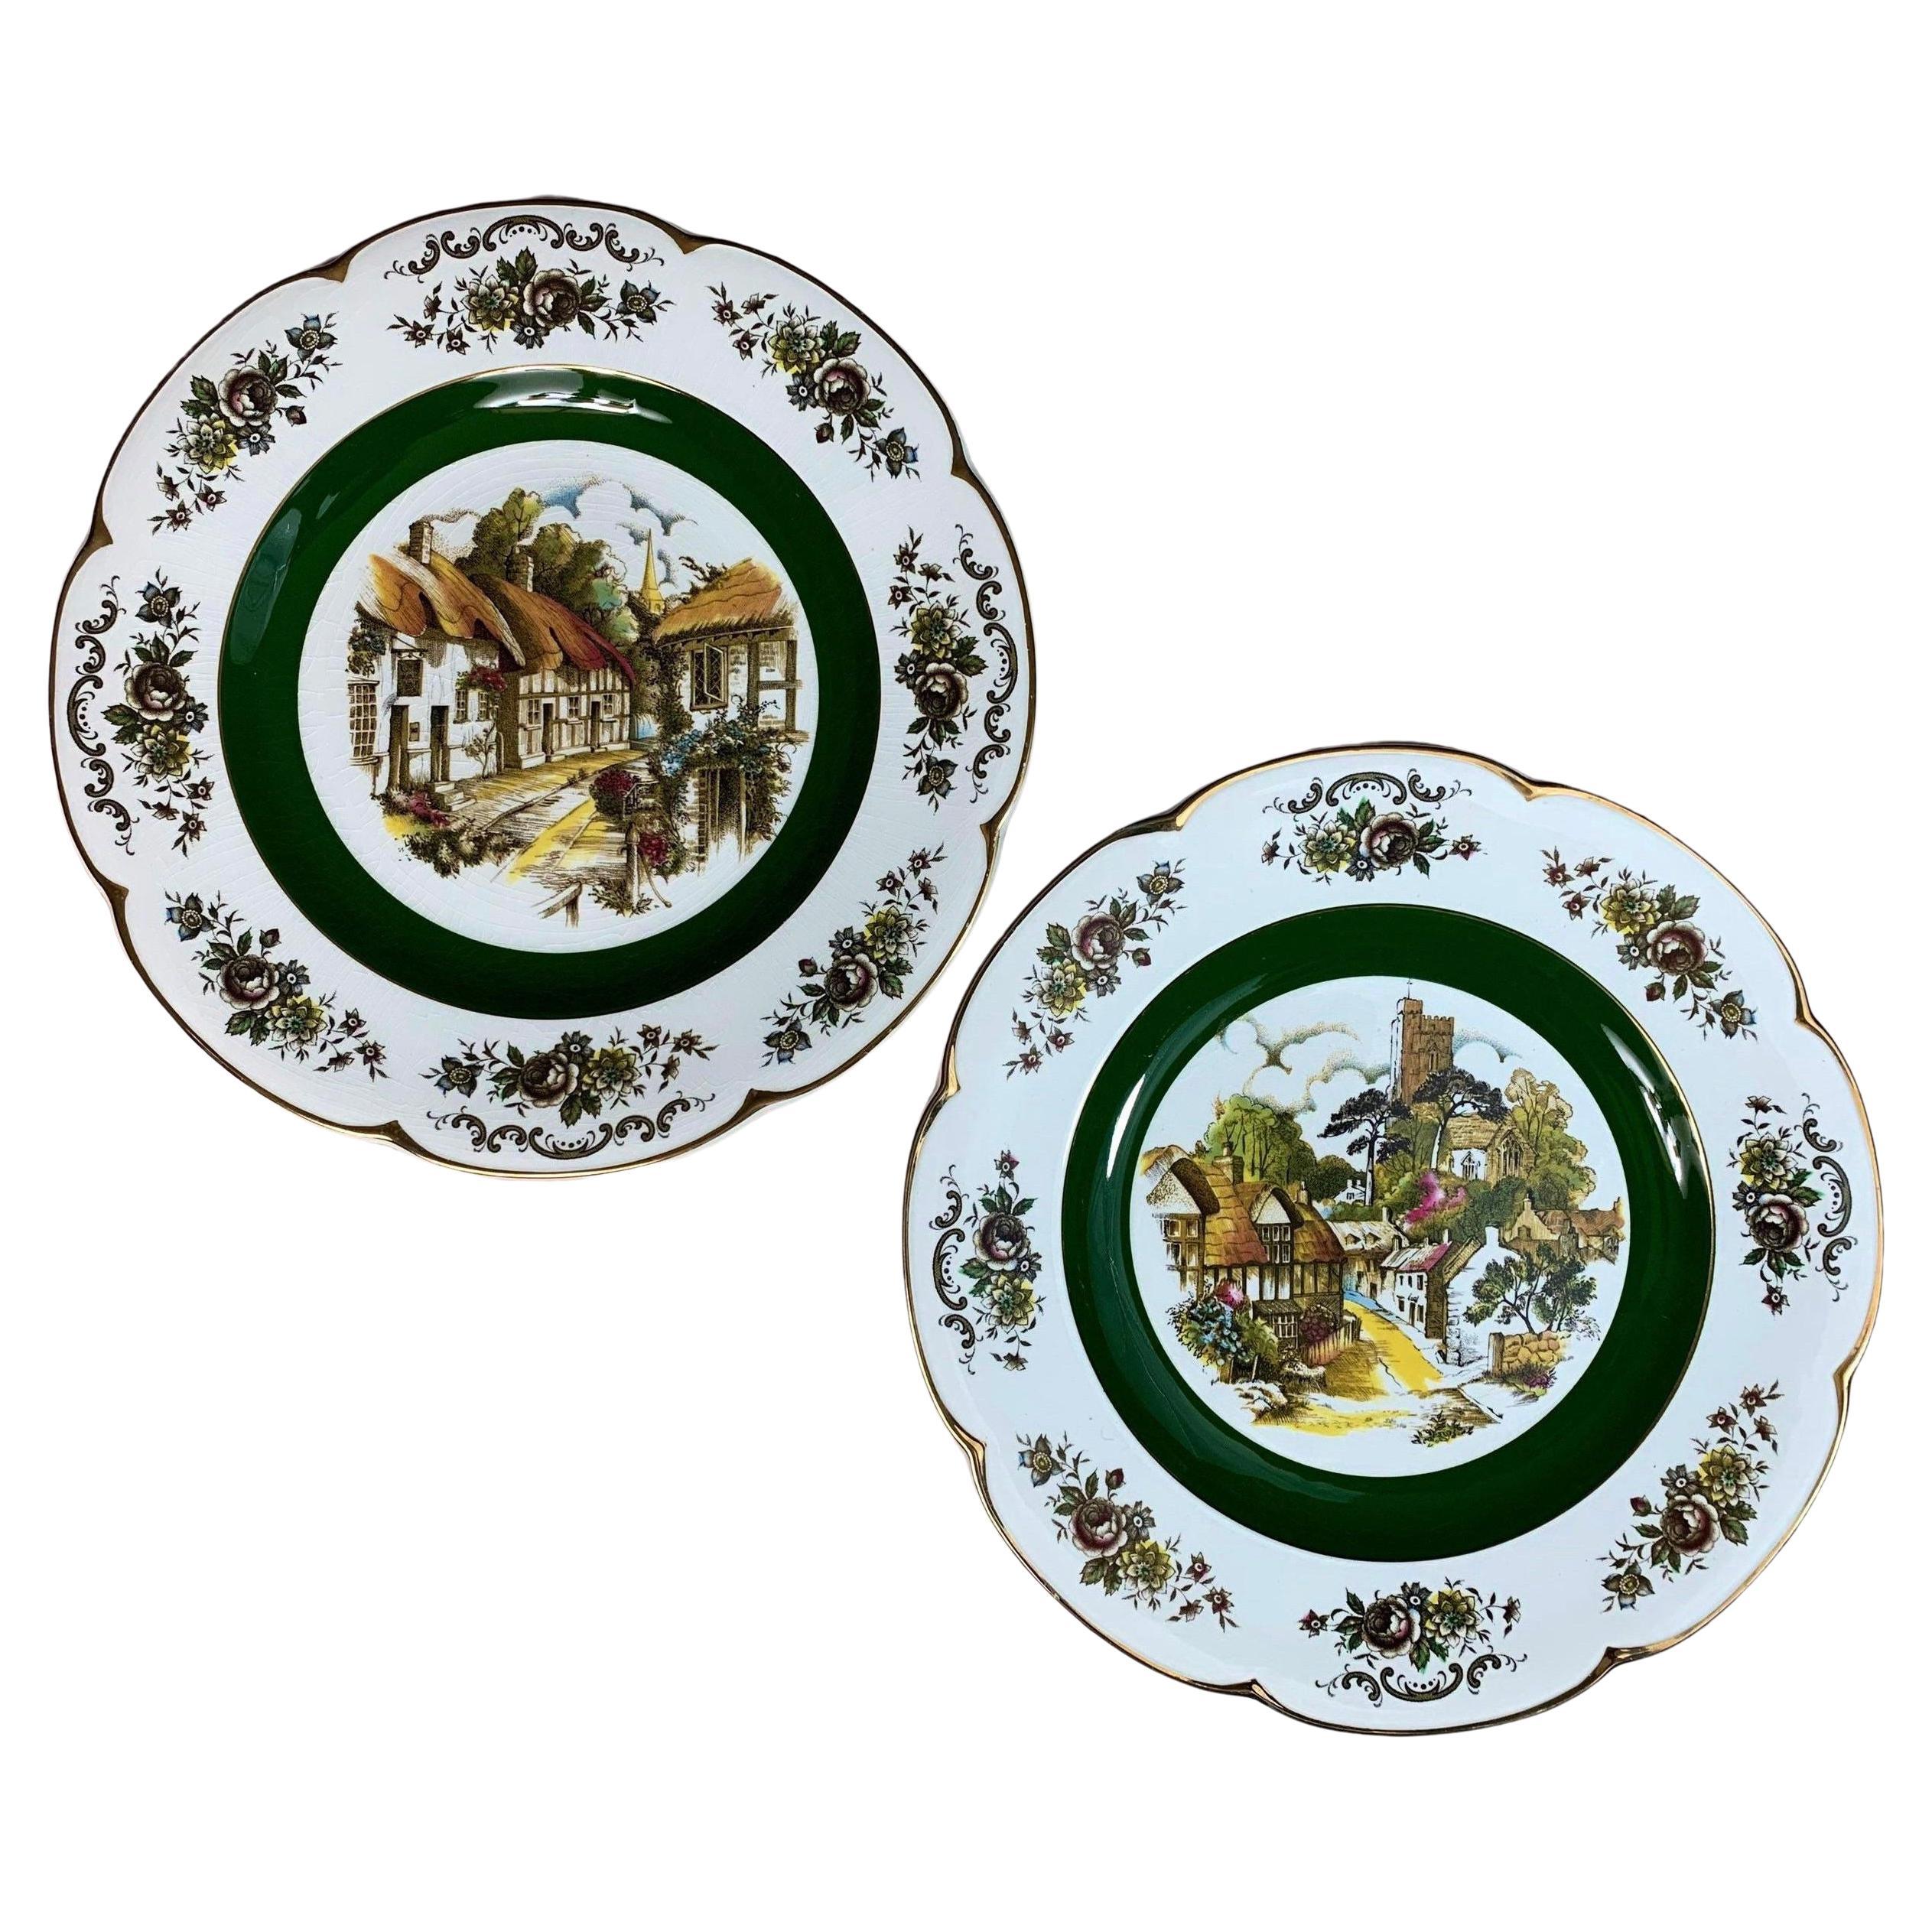 Wood and Sons Ironstone Ascot Service Plates - A Pair For Sale